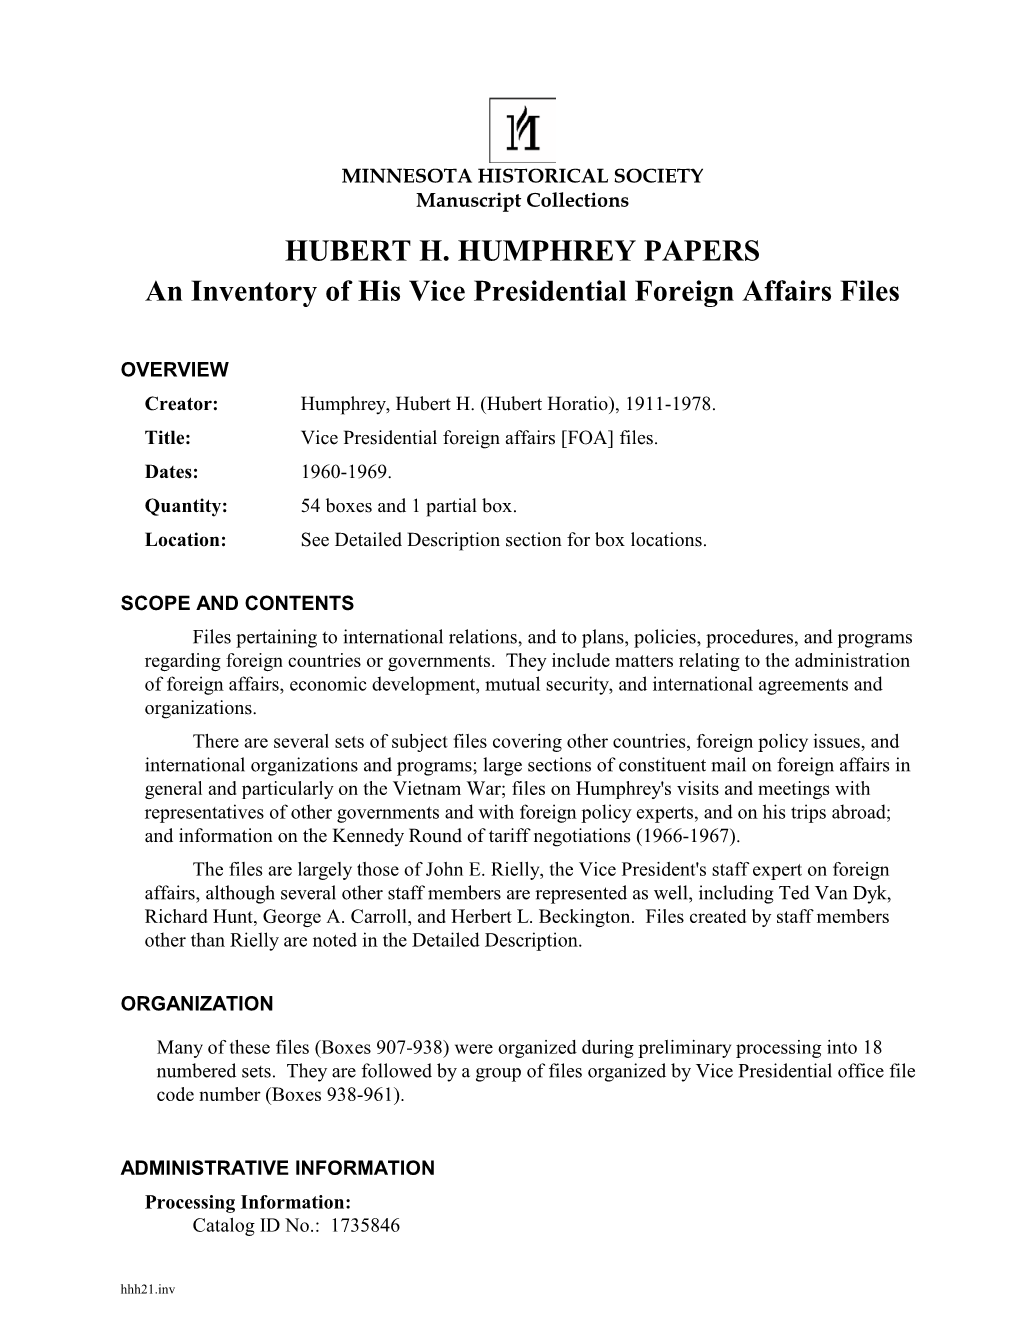 Hubert H. Humphrey Papers: an Inventory of His Vice Presidential Foreign Affairs Files at the Minnesota Historical Society